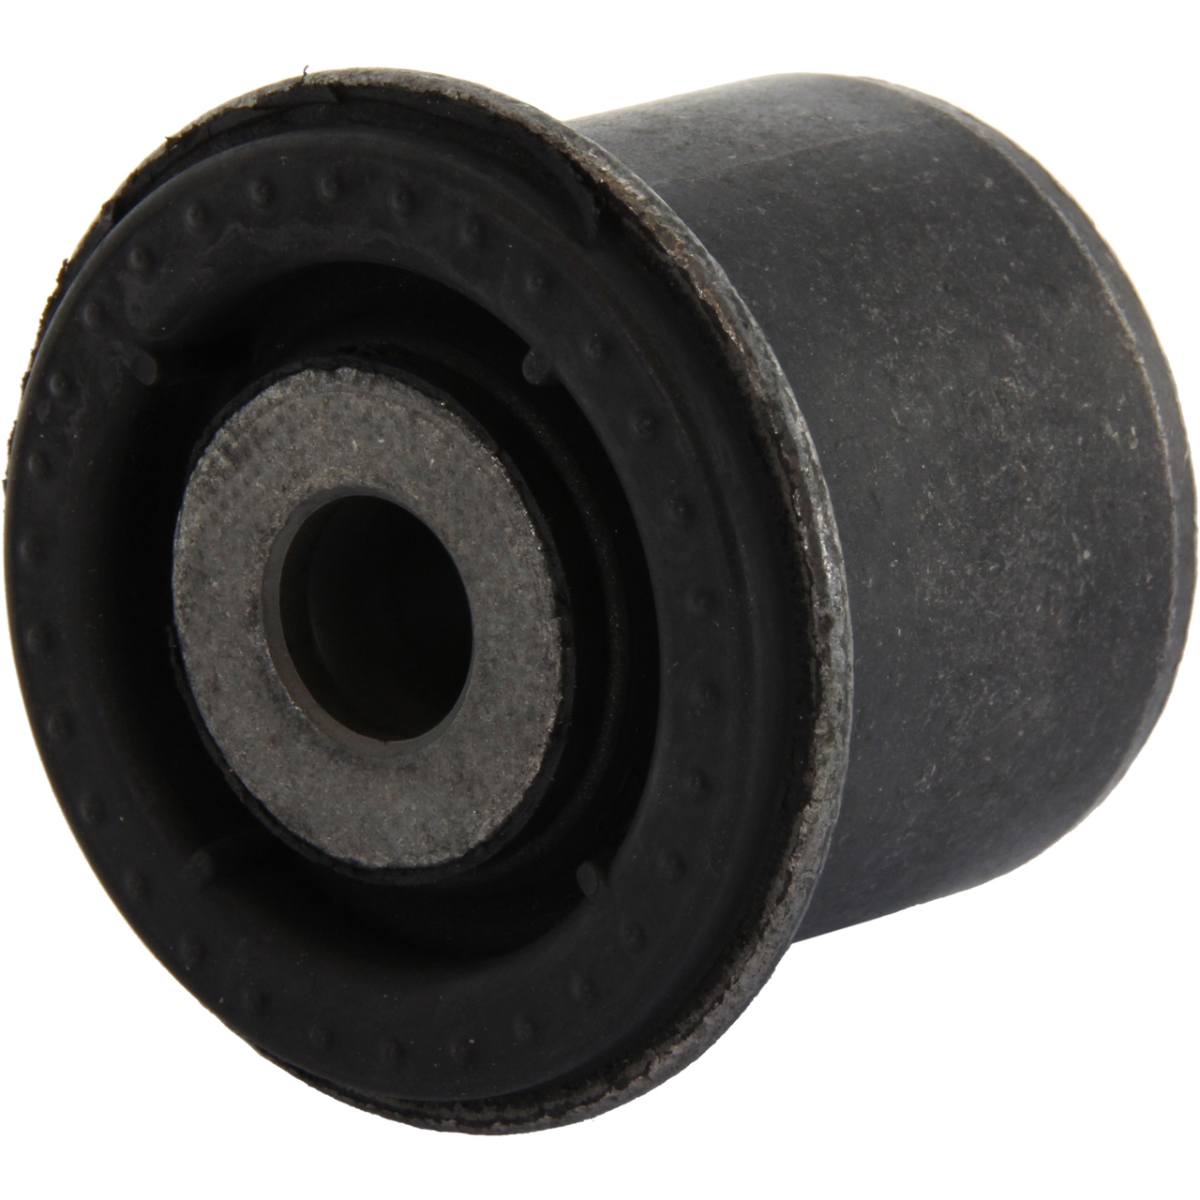 CEN602.40012 Premium Control Rear Lower Outer Forward Arm Bushings for 2001-2005 Honda Civic -  Centric Parts